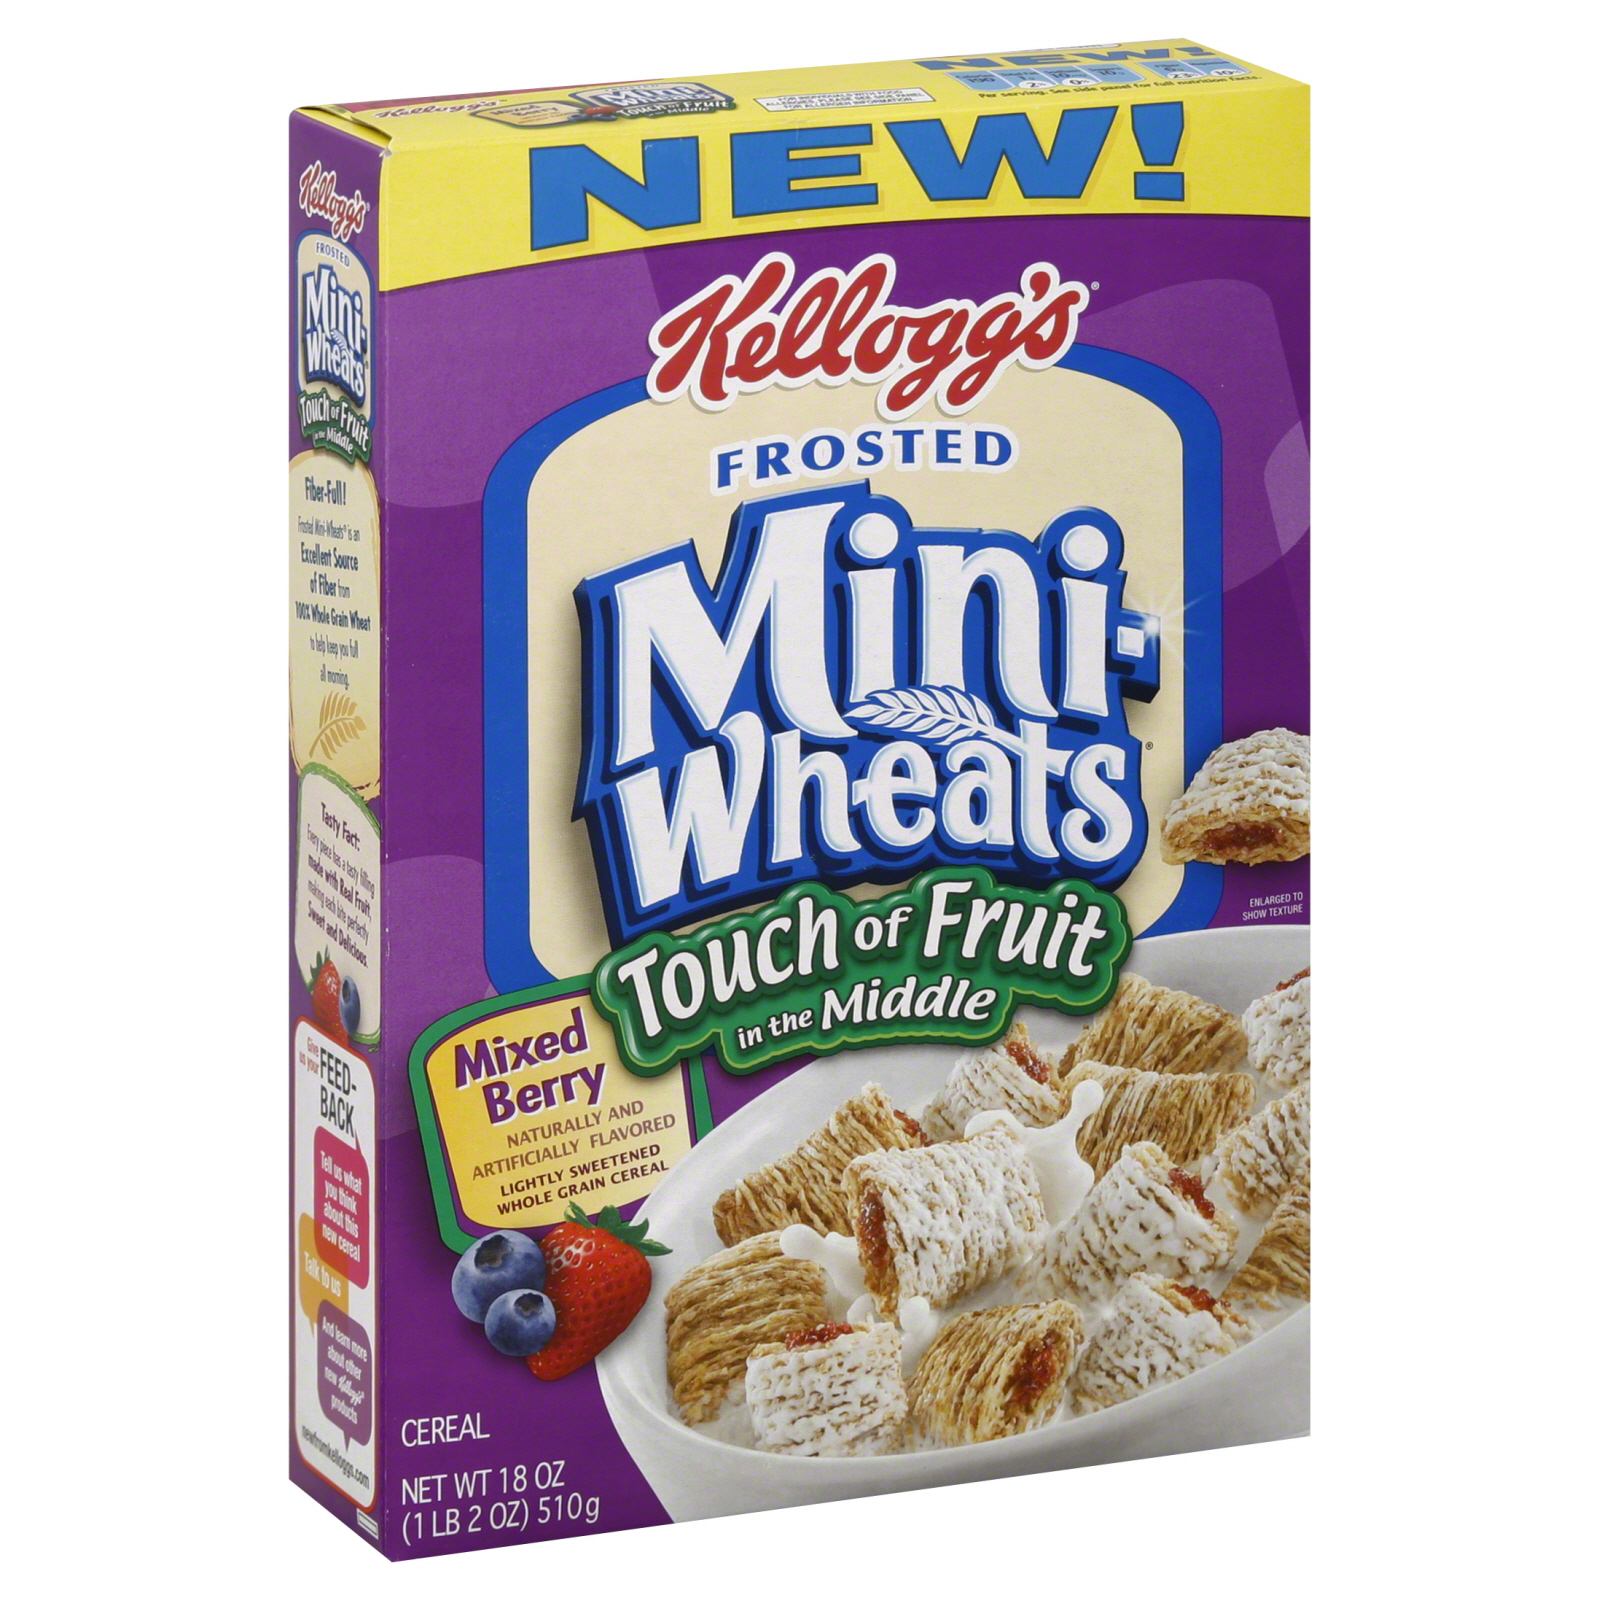 FROSTED MINI WHEATS 18OZ TOUCH OF FRUIT